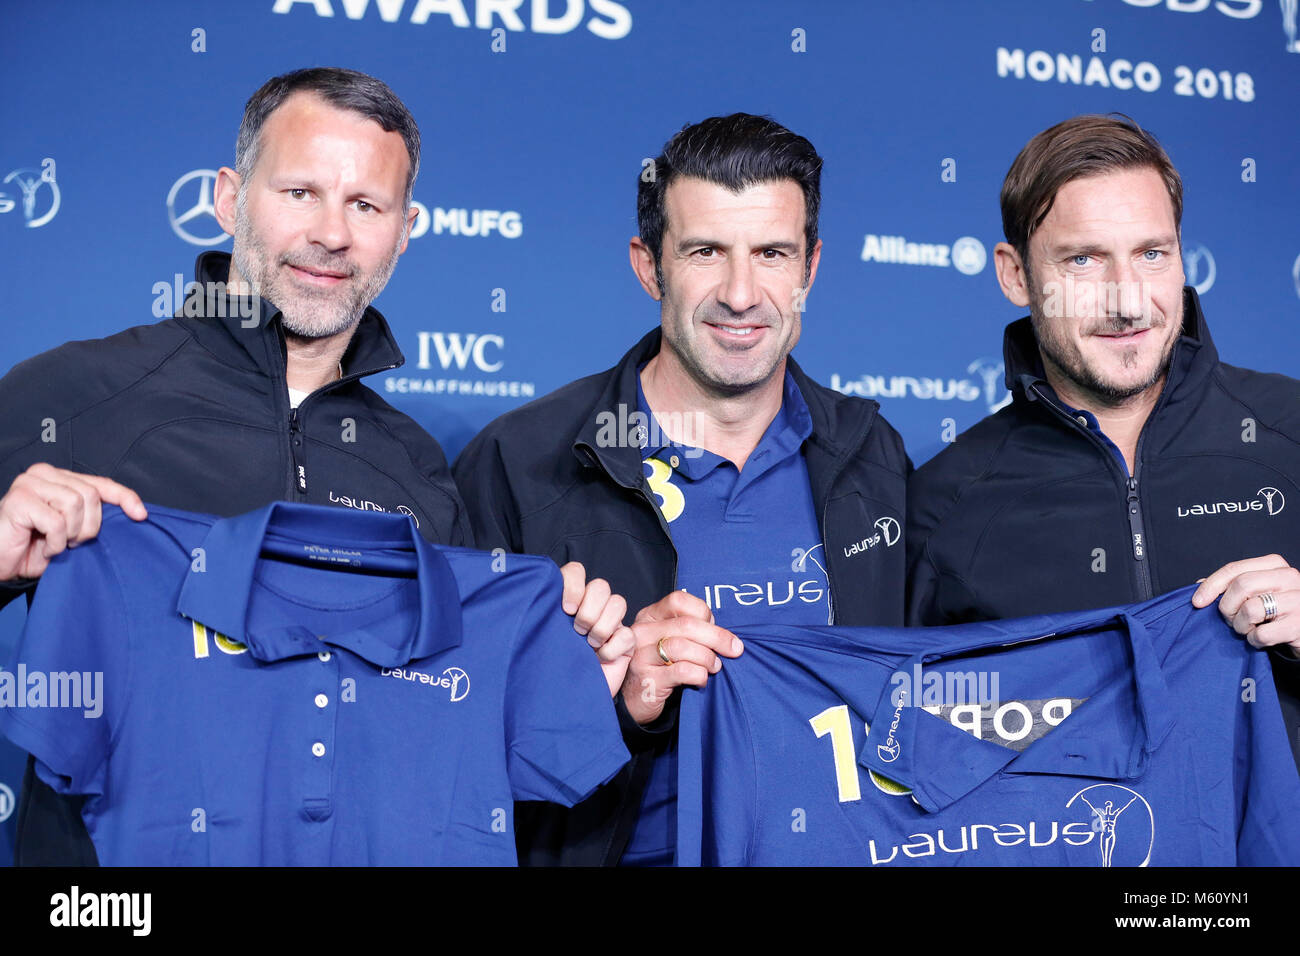 Monaco. 27th Feb, 2018. Monaco, Luis Figo of Portugal and Francesco Totti  of Italy (from L to R) attend a press conference prior to the Laureus World  Sports Awards in Former Football